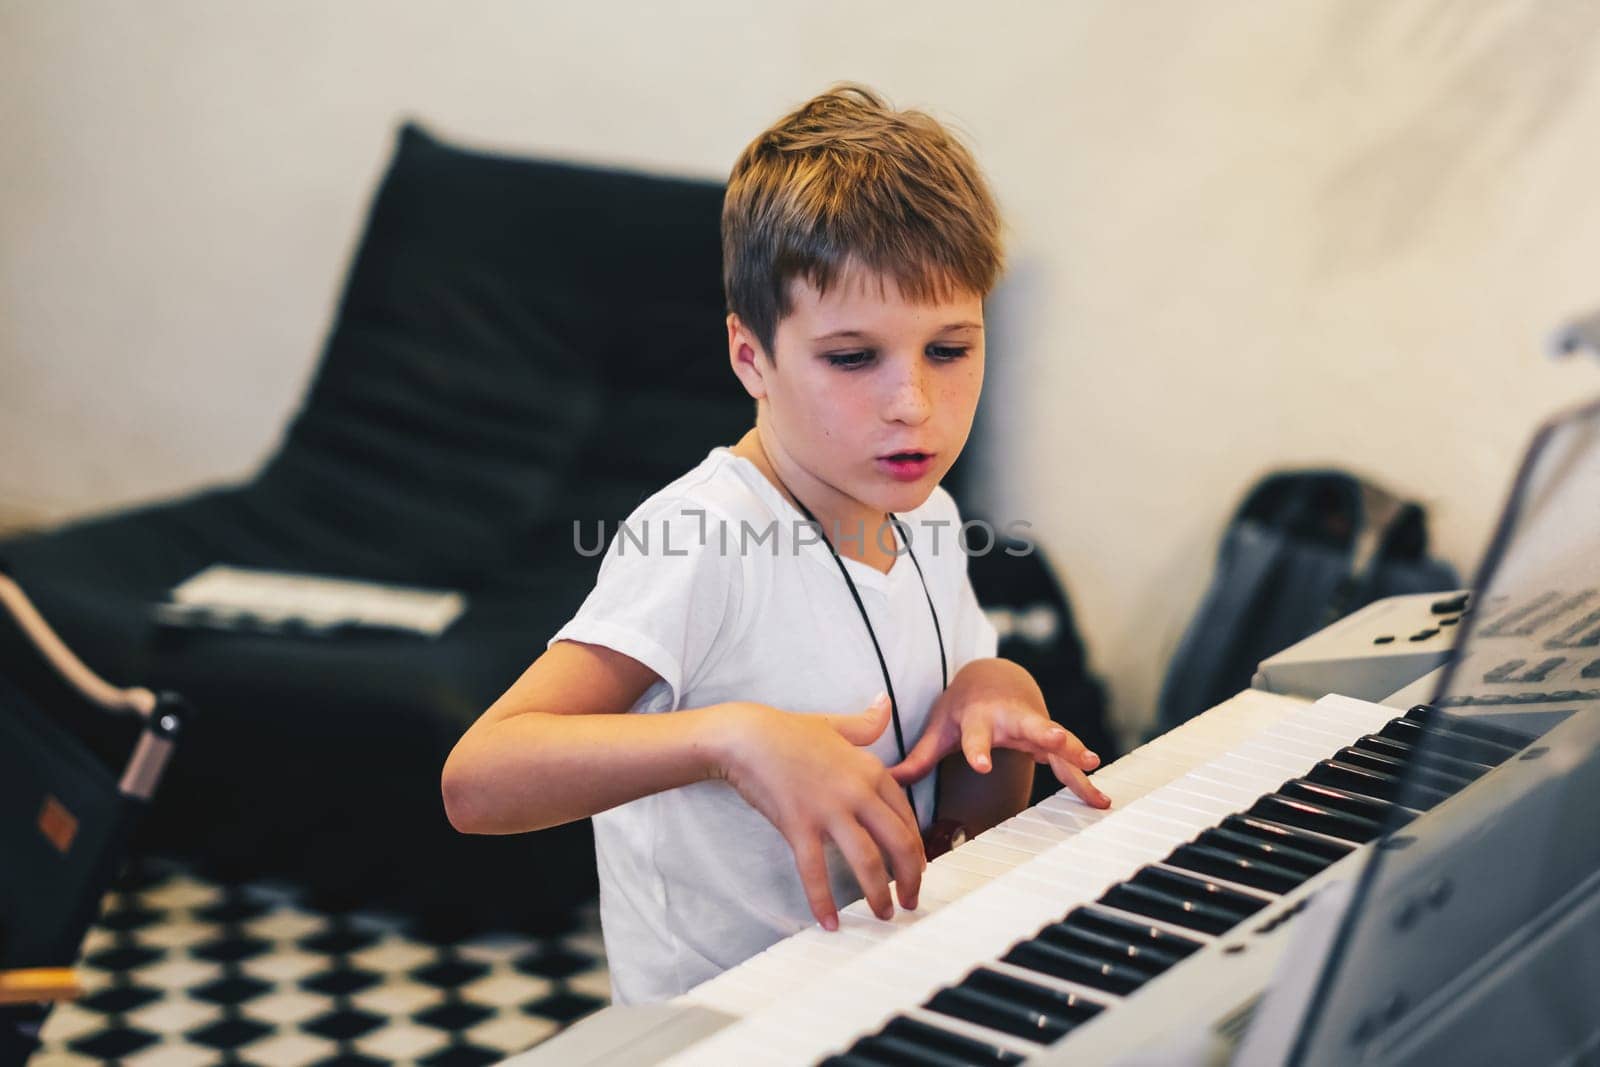 Young boy Portrait sitting at digital piano Playing keyboard focused kid activity indoors press on Key learning to play music room Hobby.